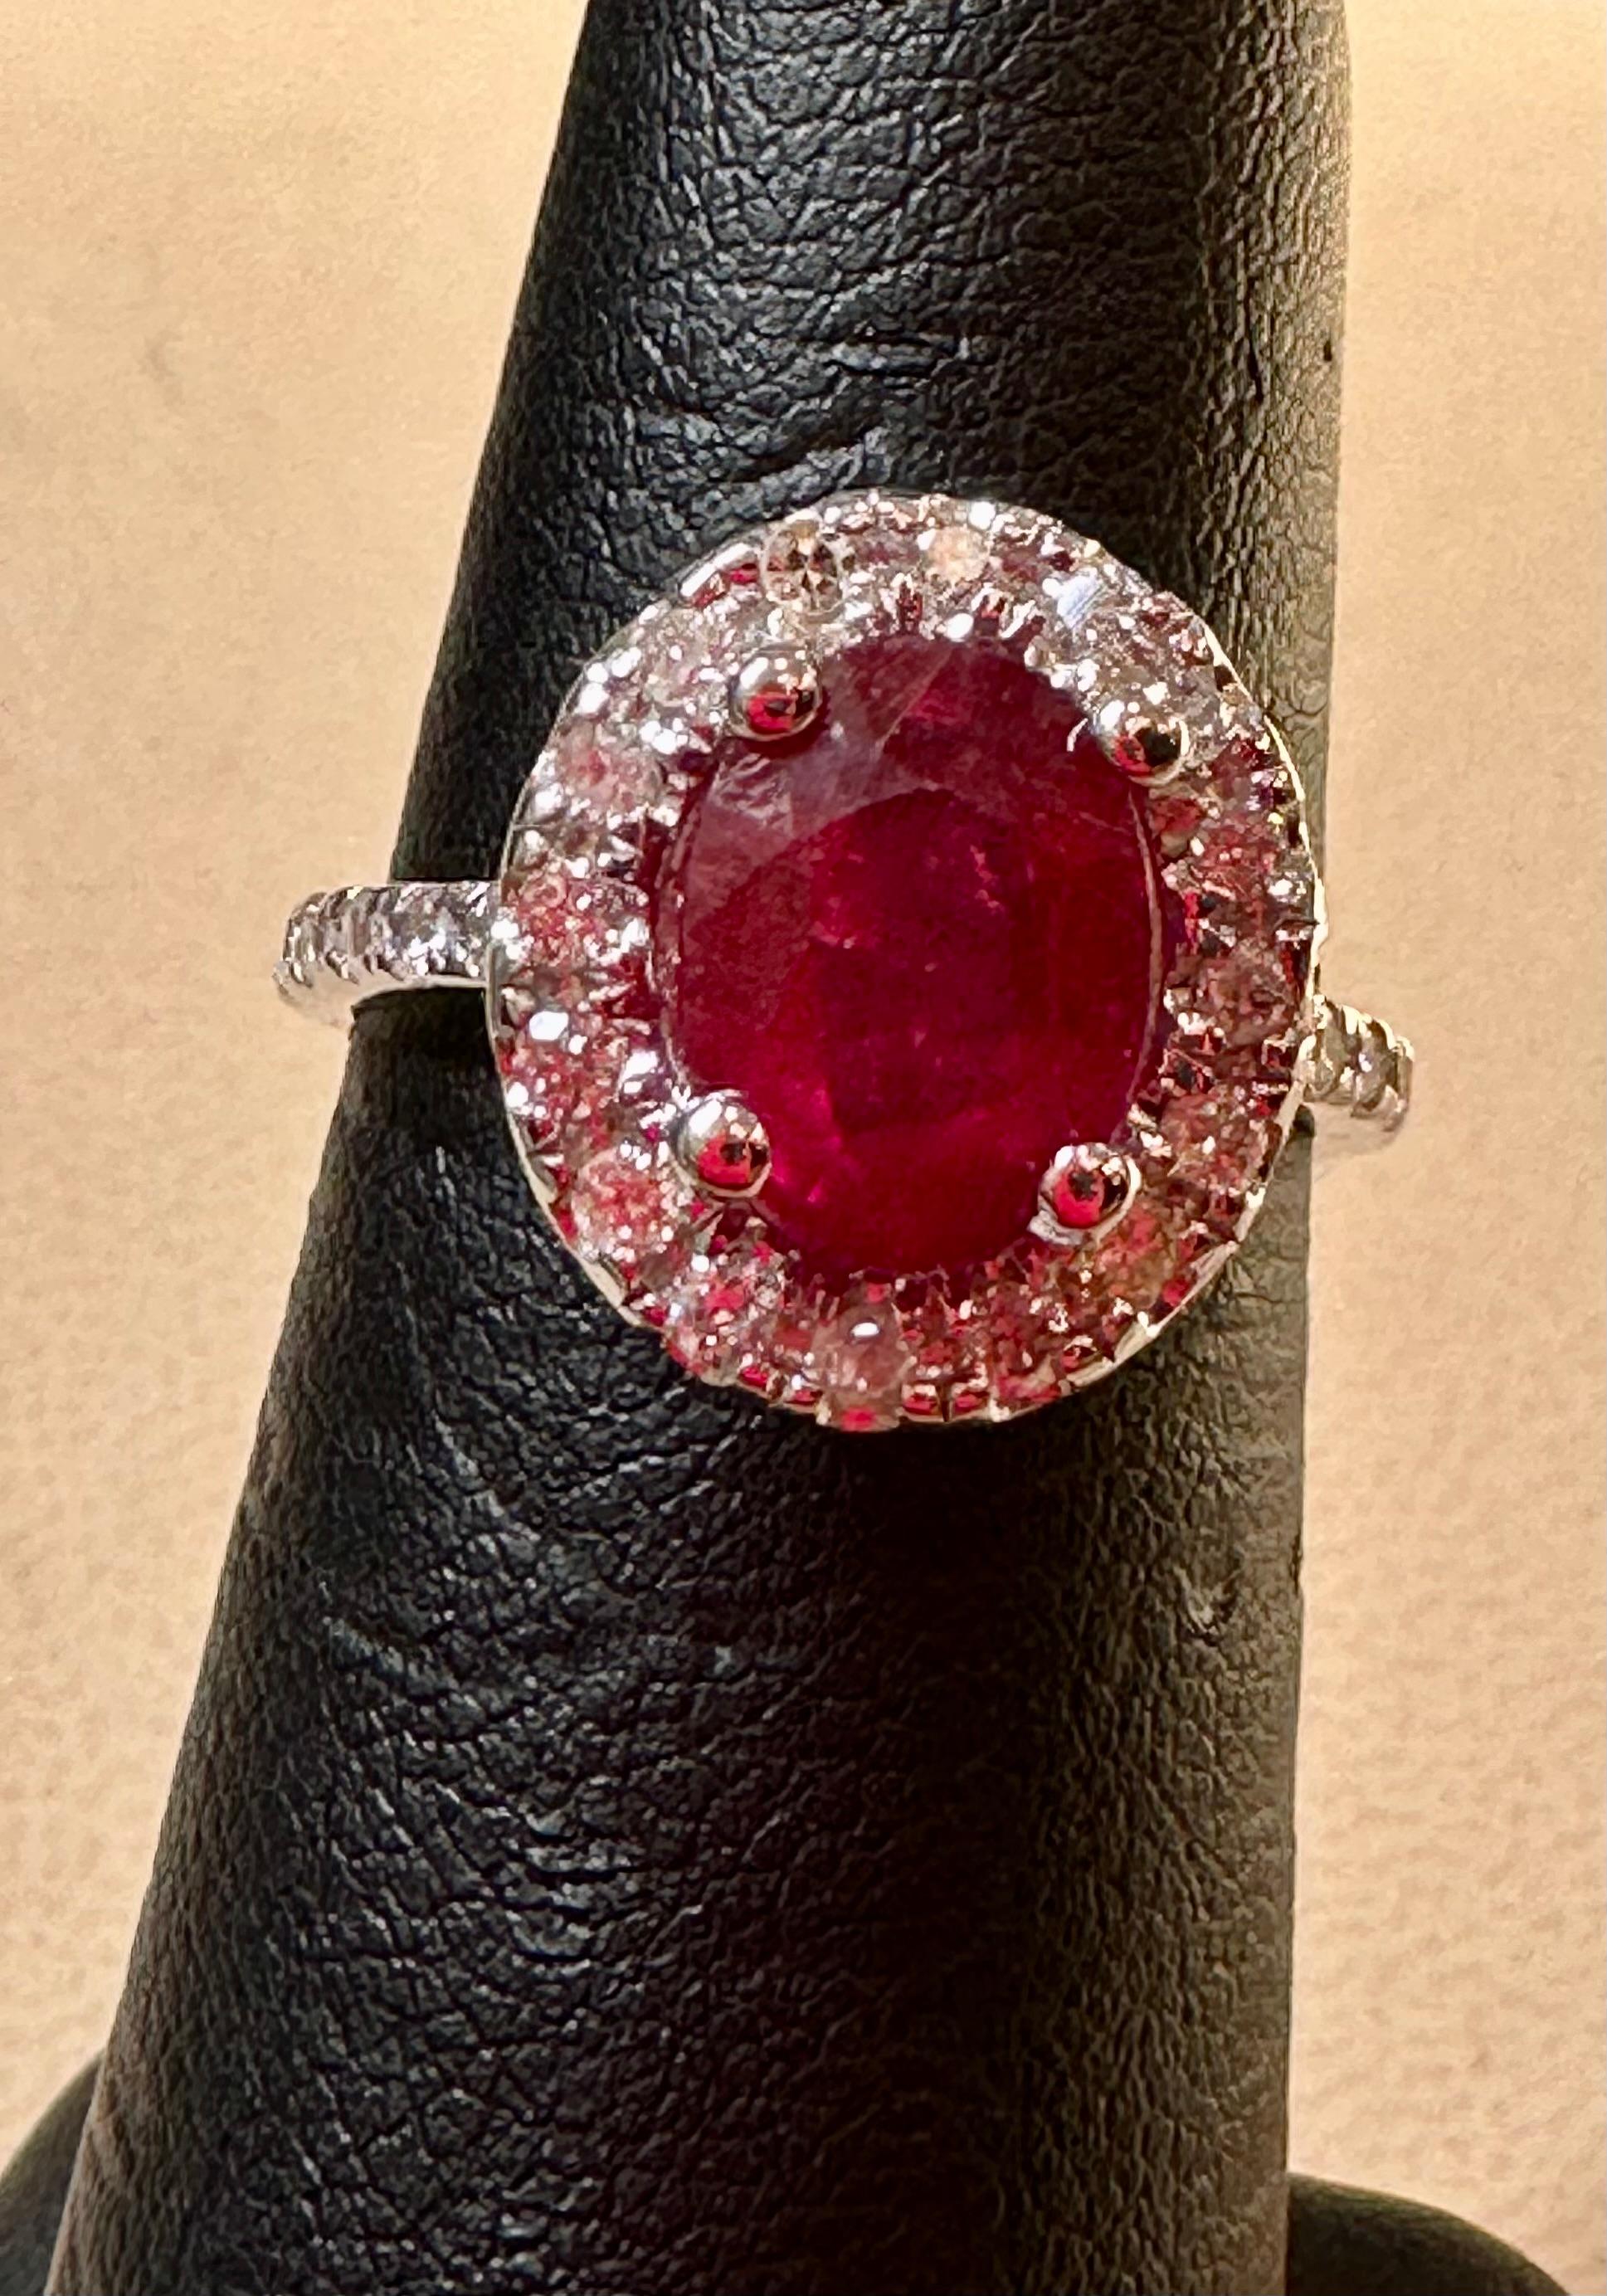 Oval Cut 3 Carat Oval Treated Ruby & 1.25 ct Diamond Ring 14 Karat White Gold Size 6 For Sale